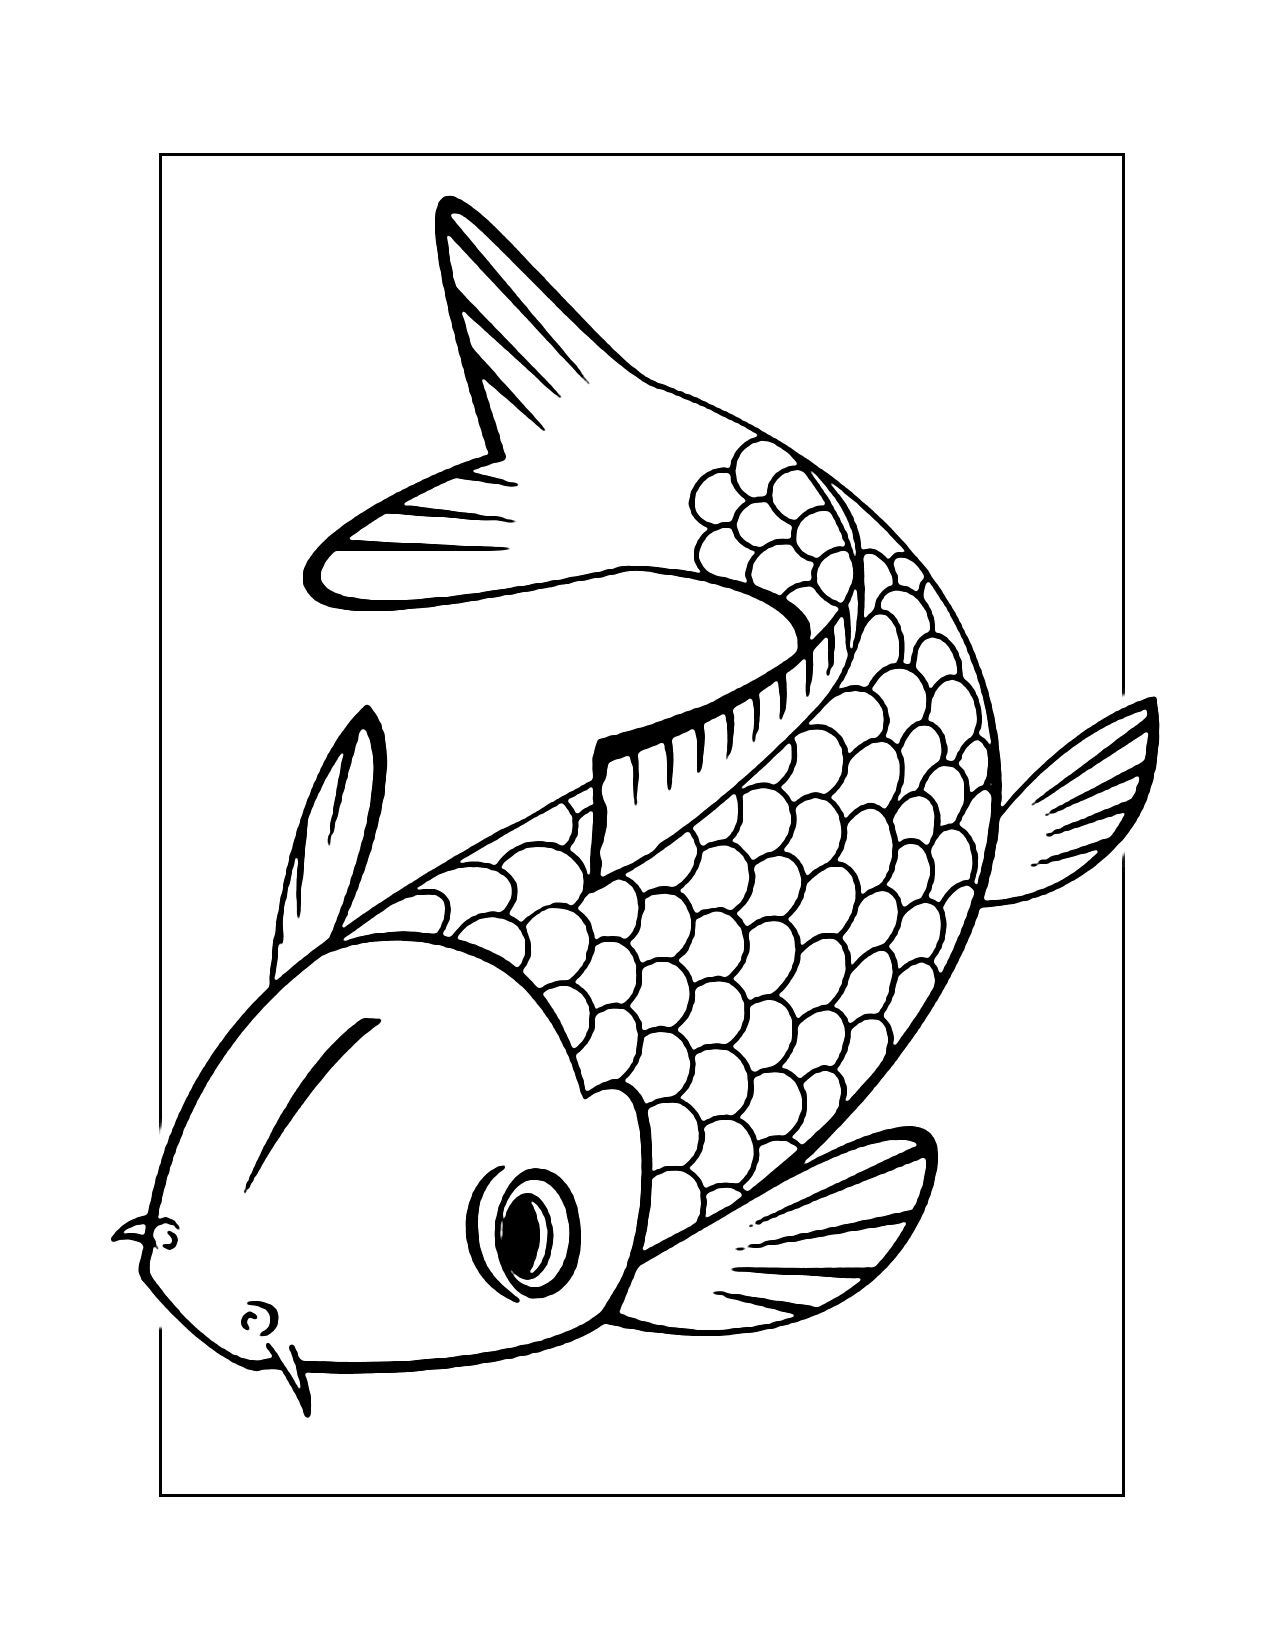 Fish With Whiskers Coloring Page